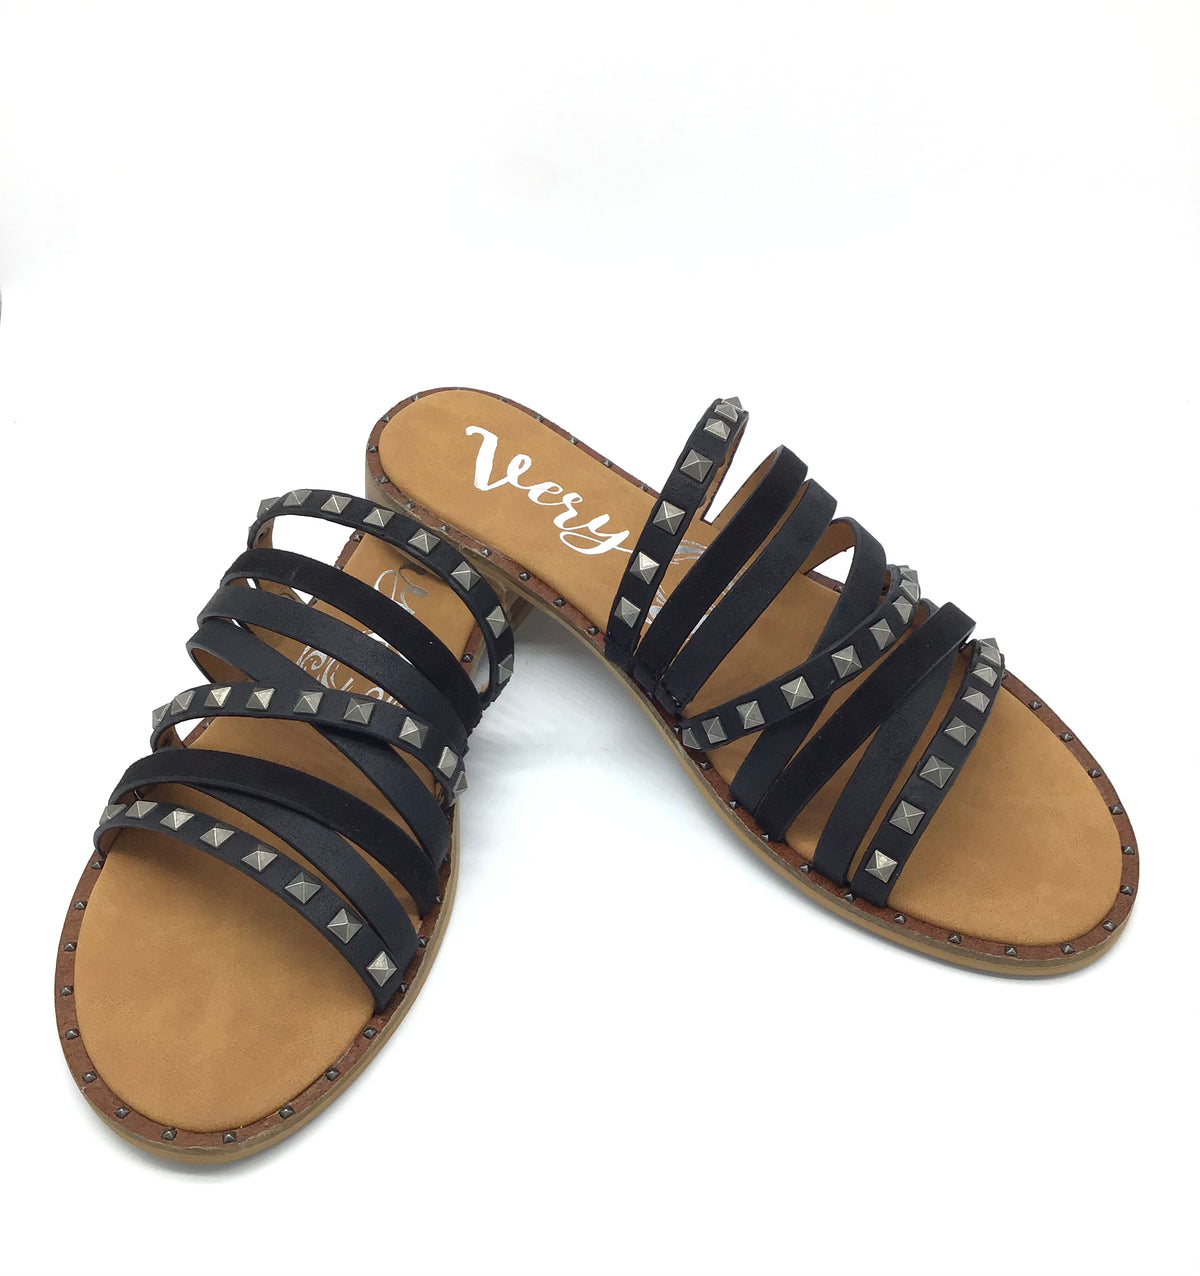 "Studs" Sandals By Very G